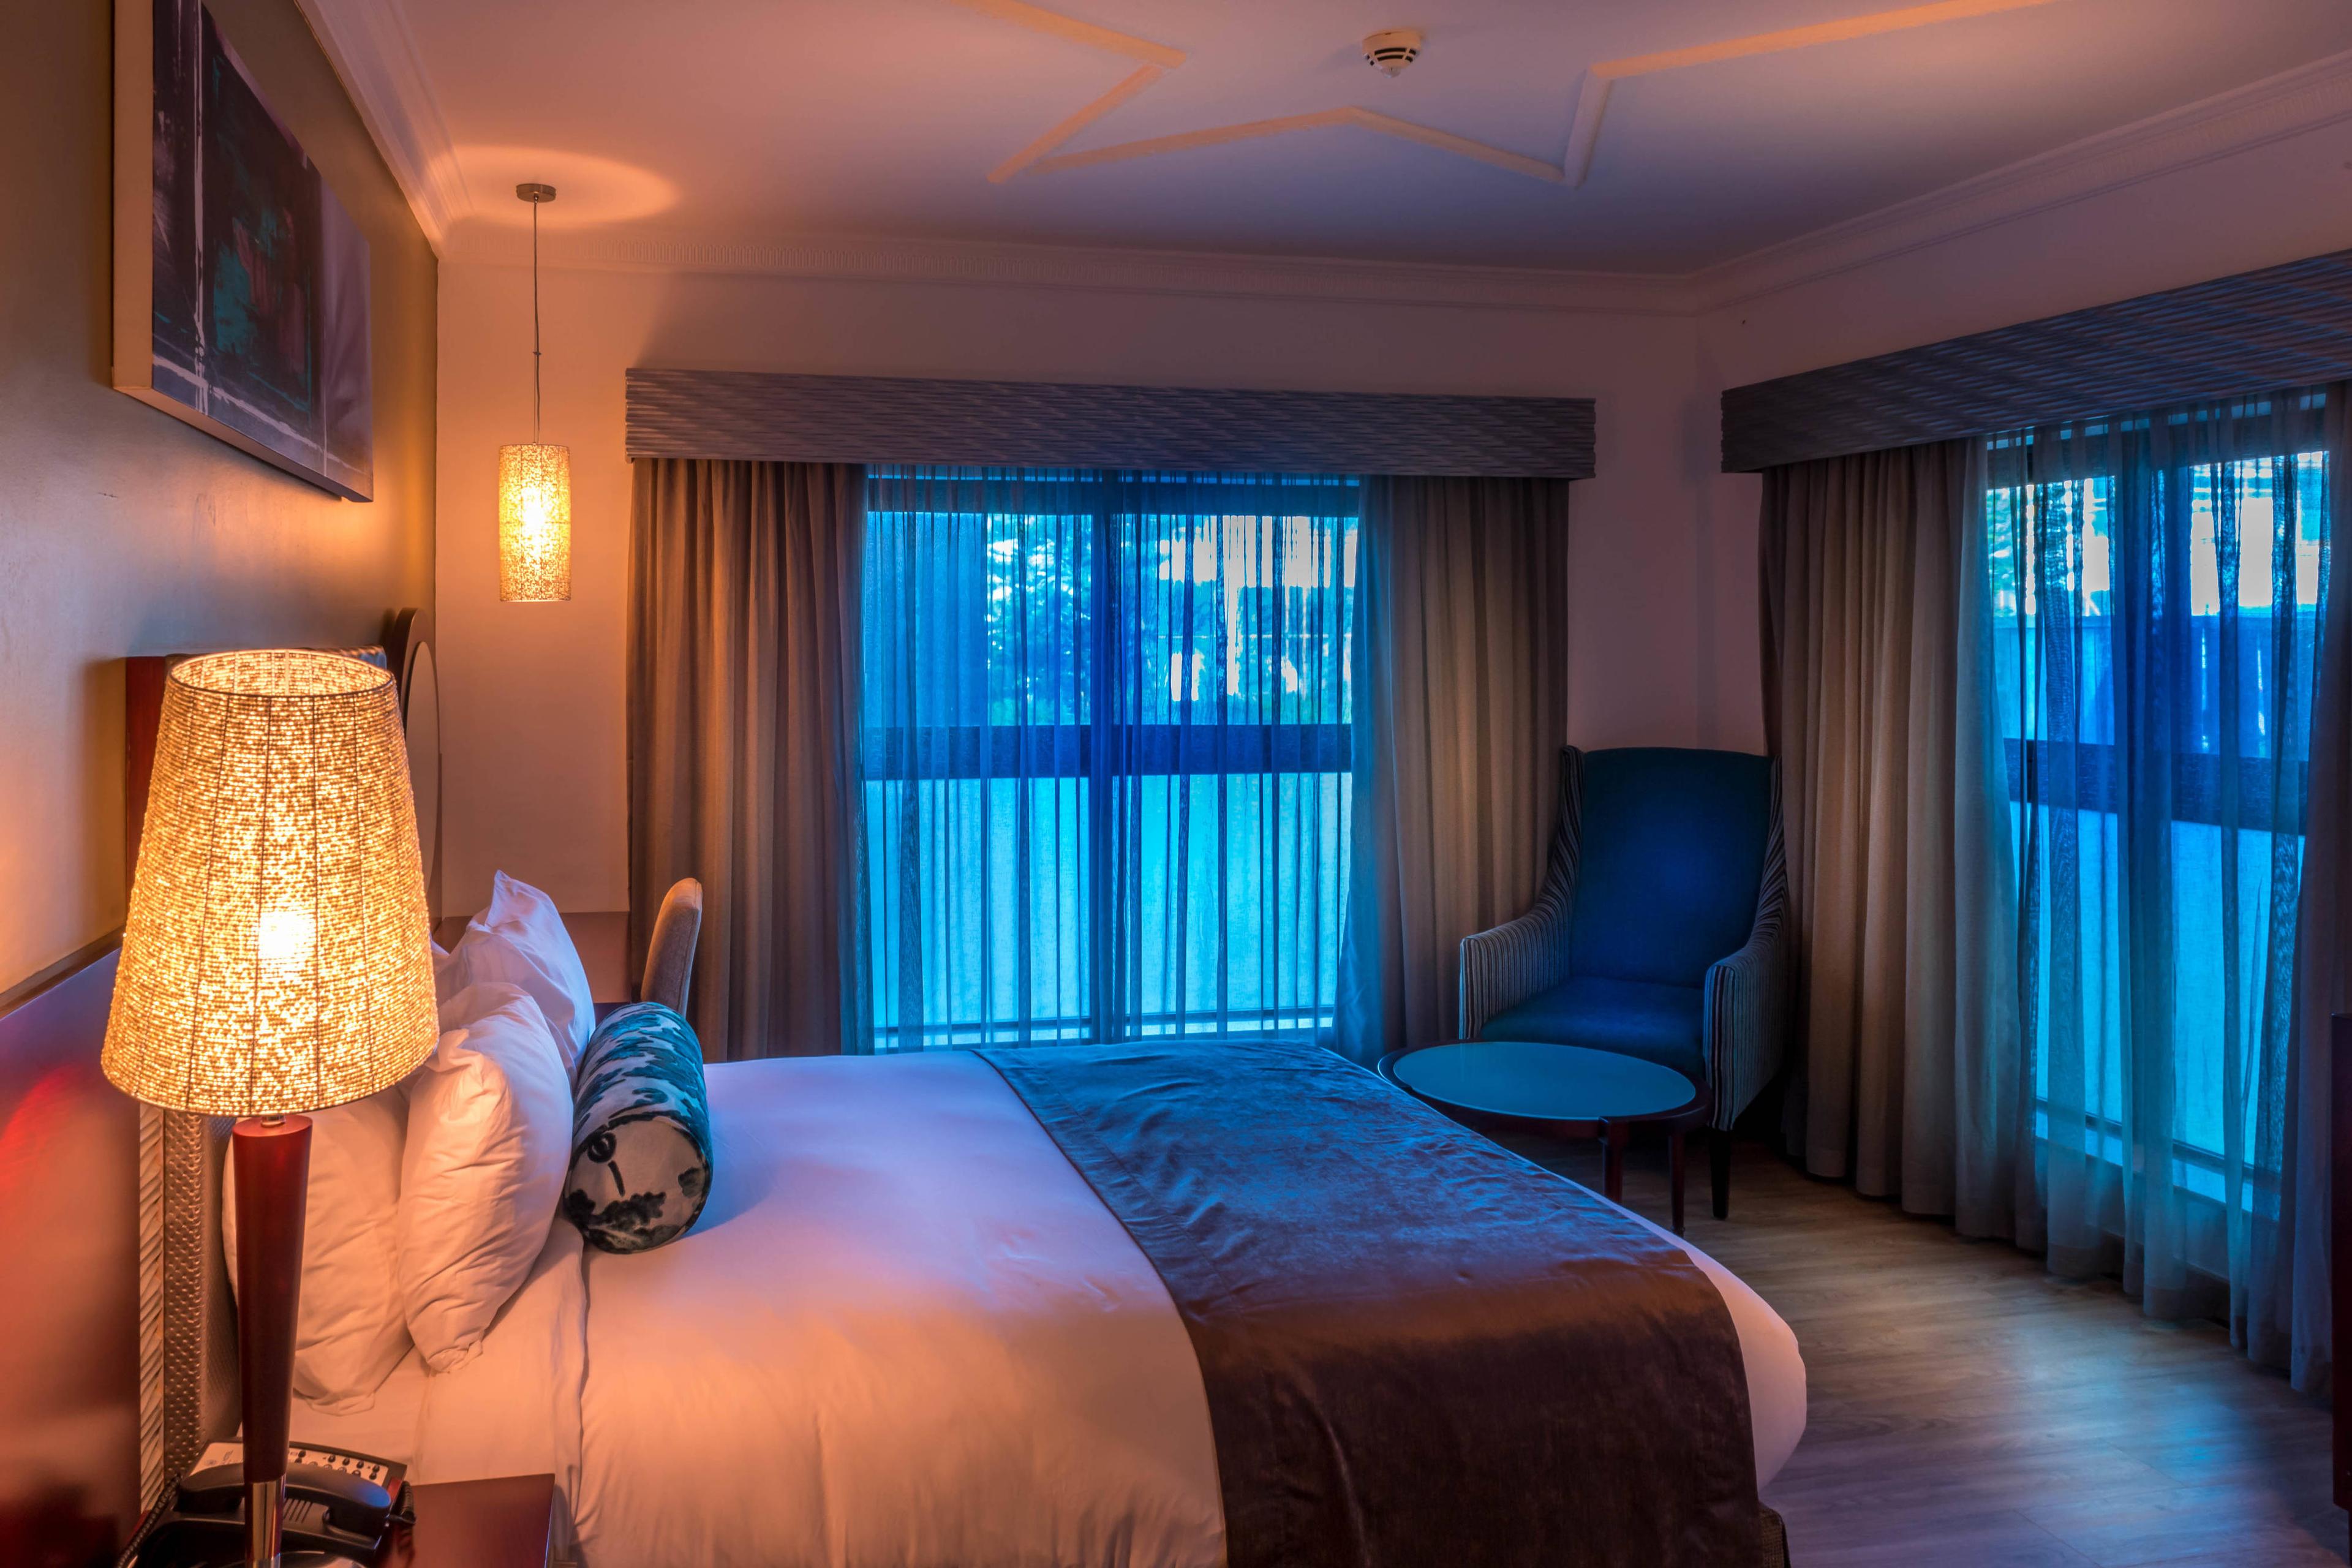 The Diplomat Room comes with a queen size bed and offers ocean views from the balcony. Guest amenities include tea/coffee-making facilities, airconditioning, complimentary Wi-Fi and mini-refrigerator.